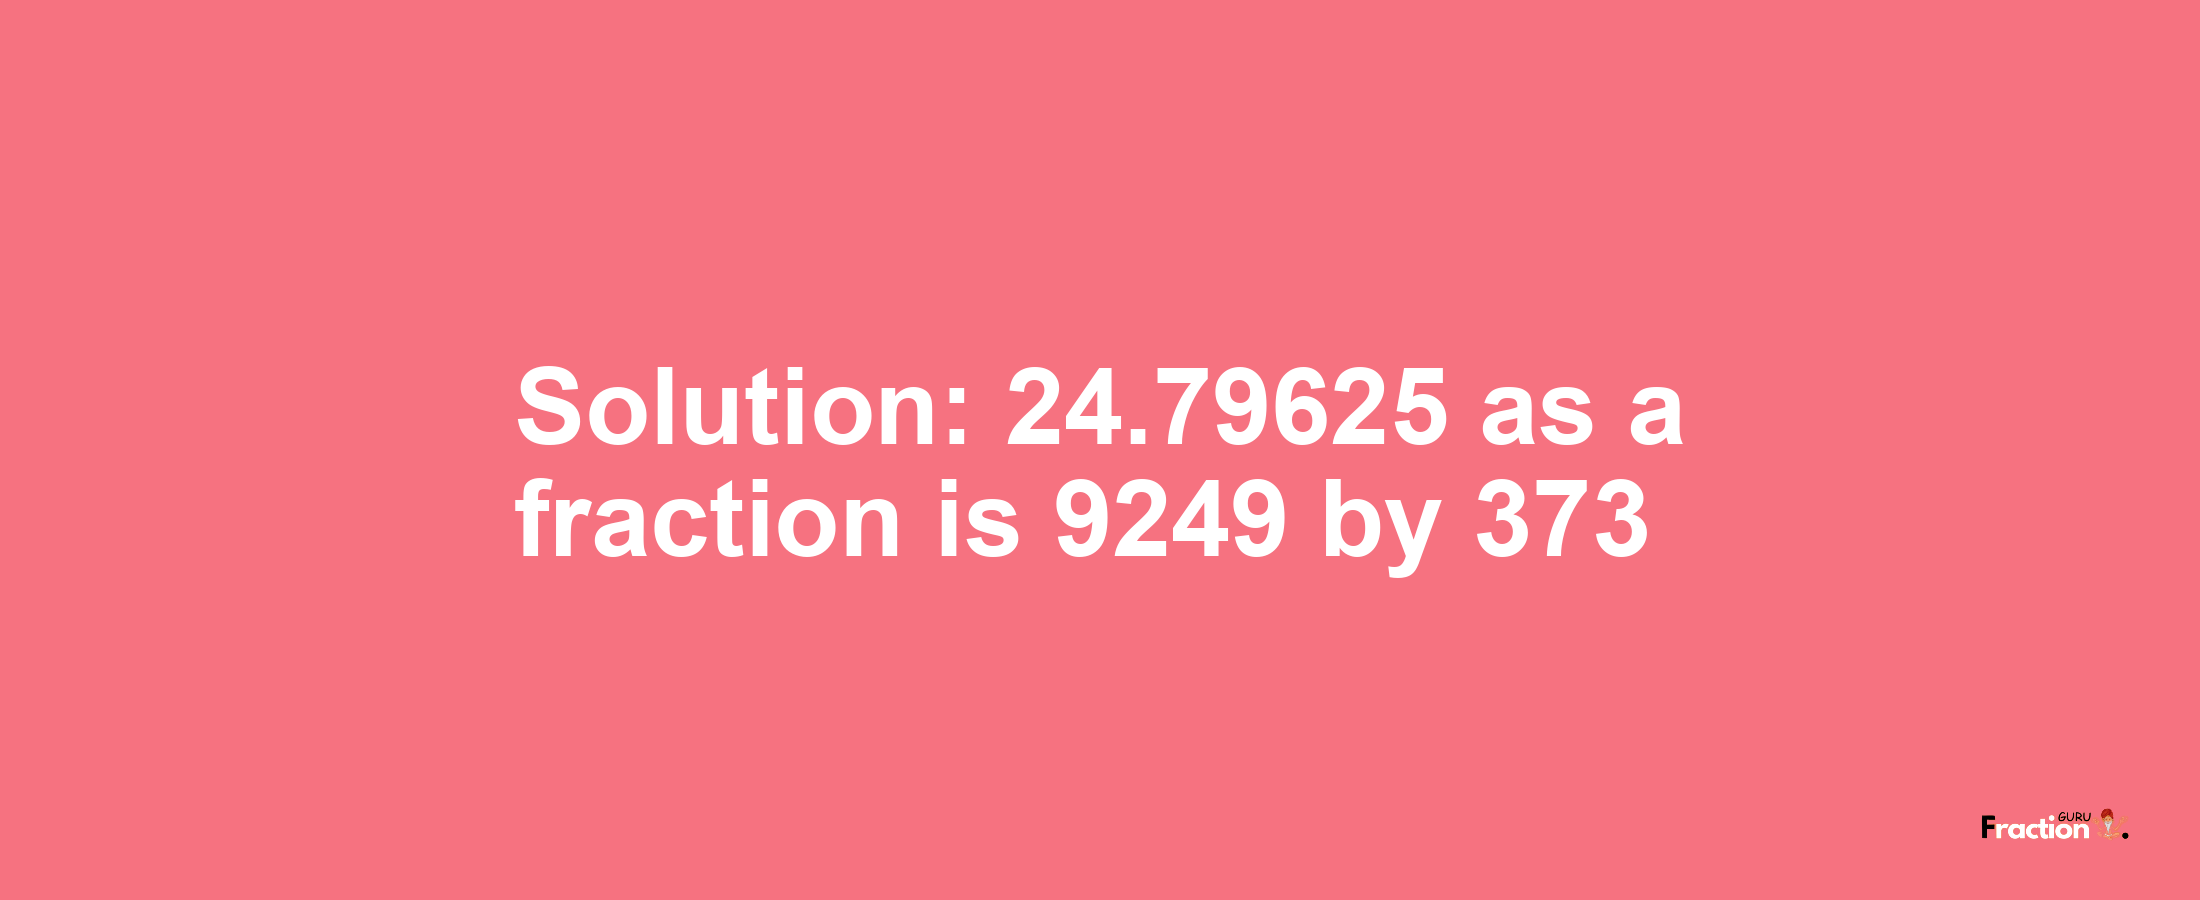 Solution:24.79625 as a fraction is 9249/373